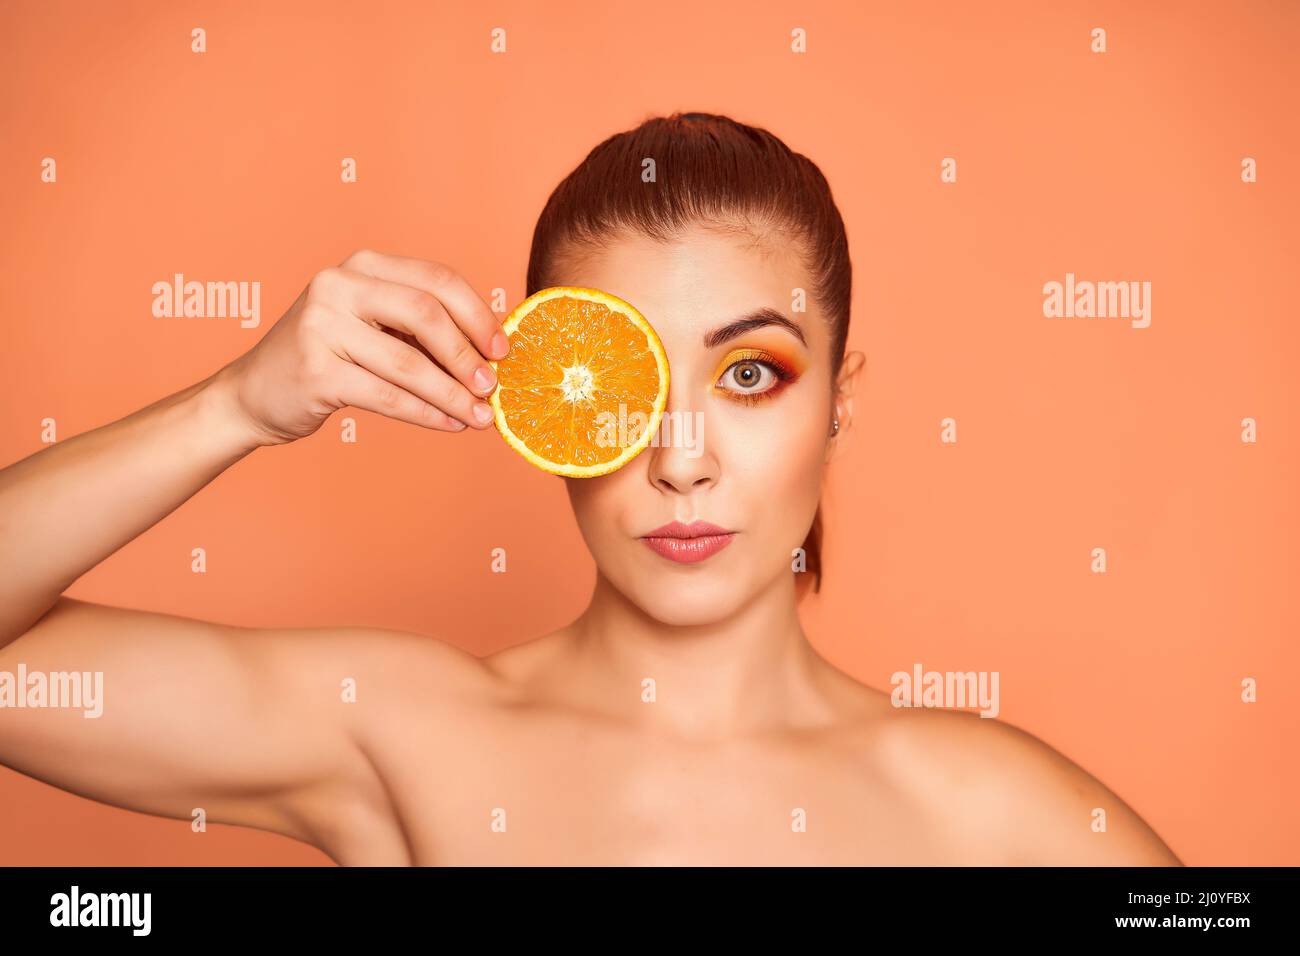 Closeup portrait of beautiful happy girl holding half of oranges near face, isolated on orange background. Concept of beauty and health care. High quality photo Stock Photo